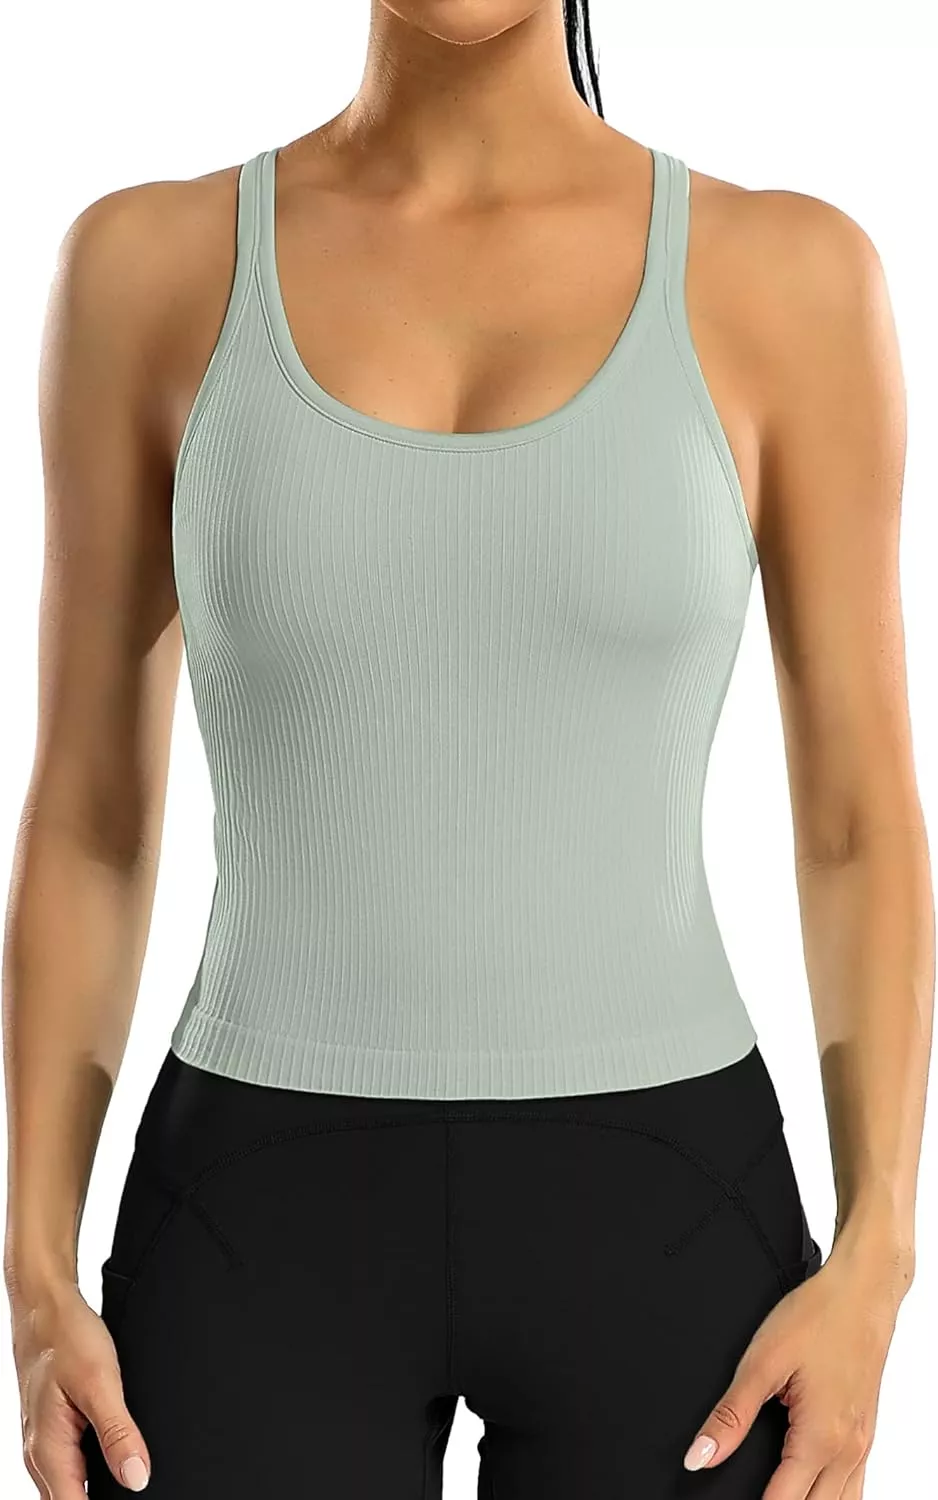 ATTRACO Black Workout Tops for Women Built in Bra Tank Tops Racer Back Yoga  T